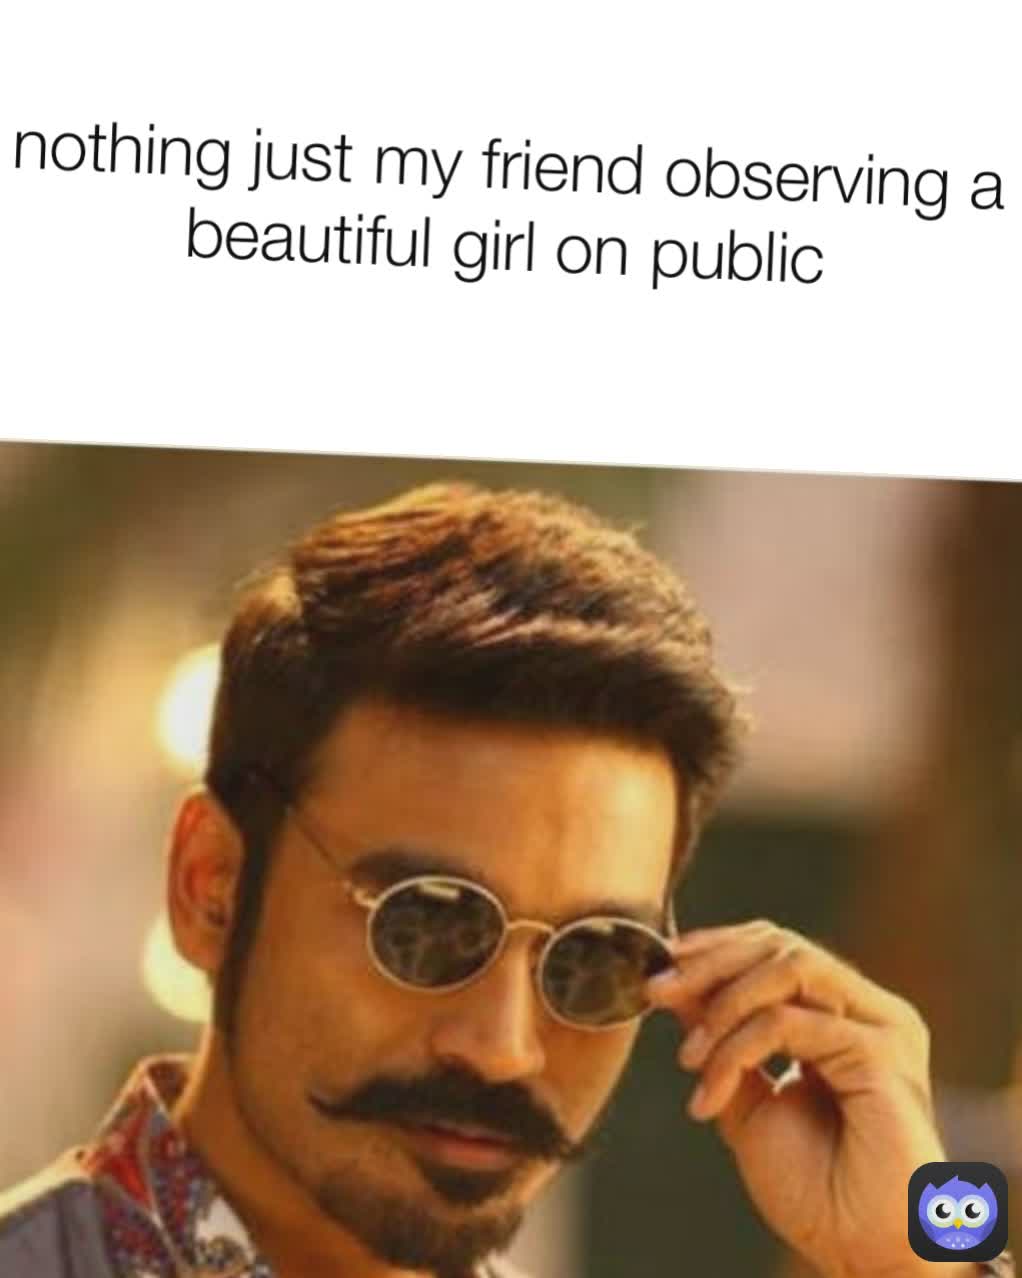 nothing just my friend observing a beautiful girl on public